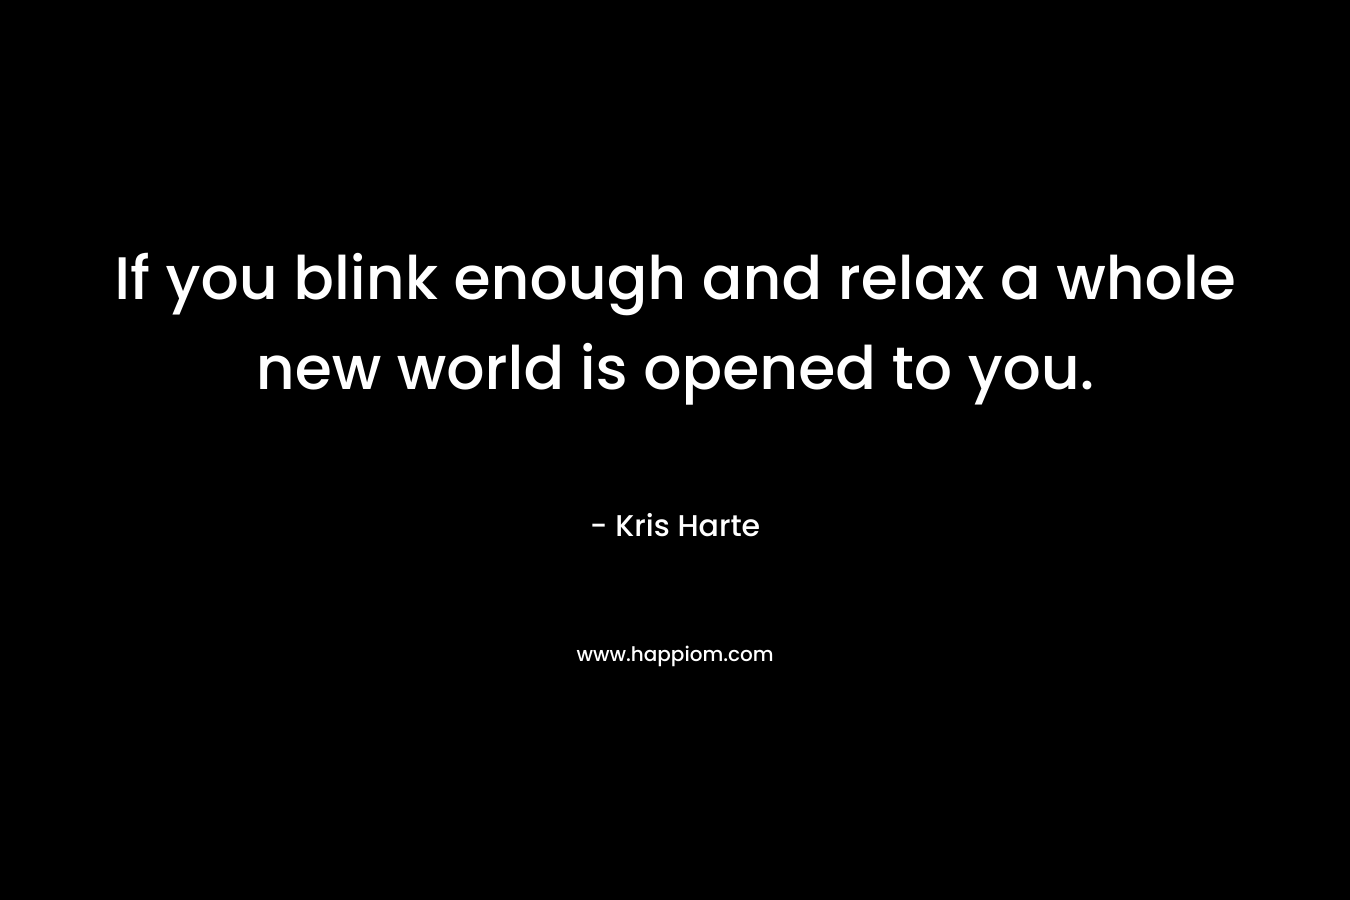 If you blink enough and relax a whole new world is opened to you. – Kris Harte